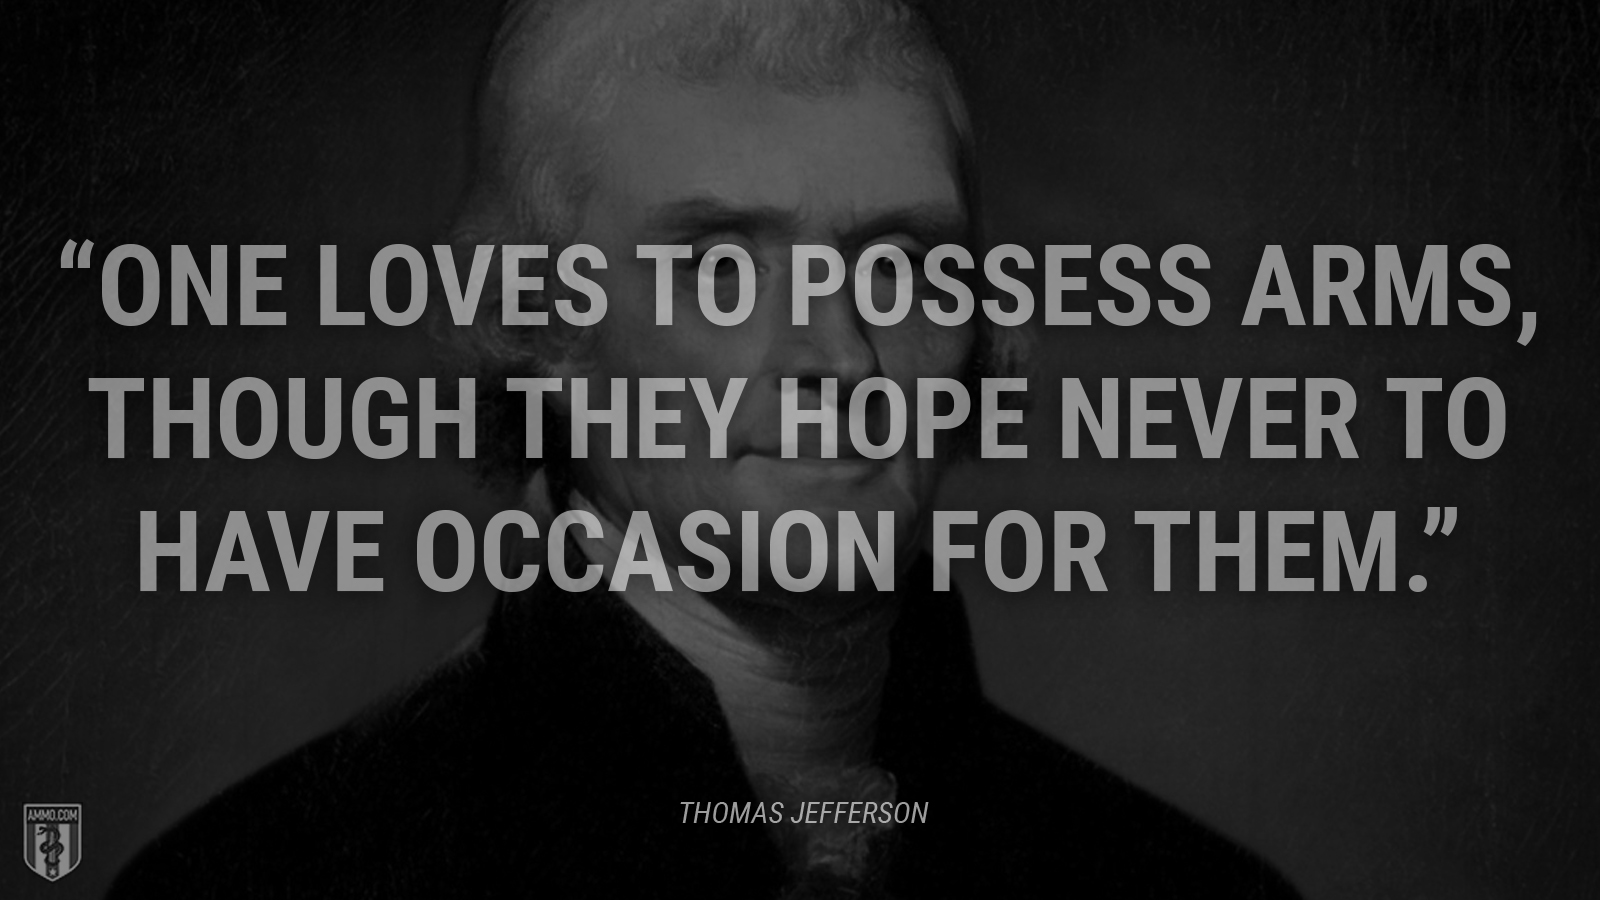 “One loves to possess arms, though they hope never to have occasion for them.” - Thomas Jefferson